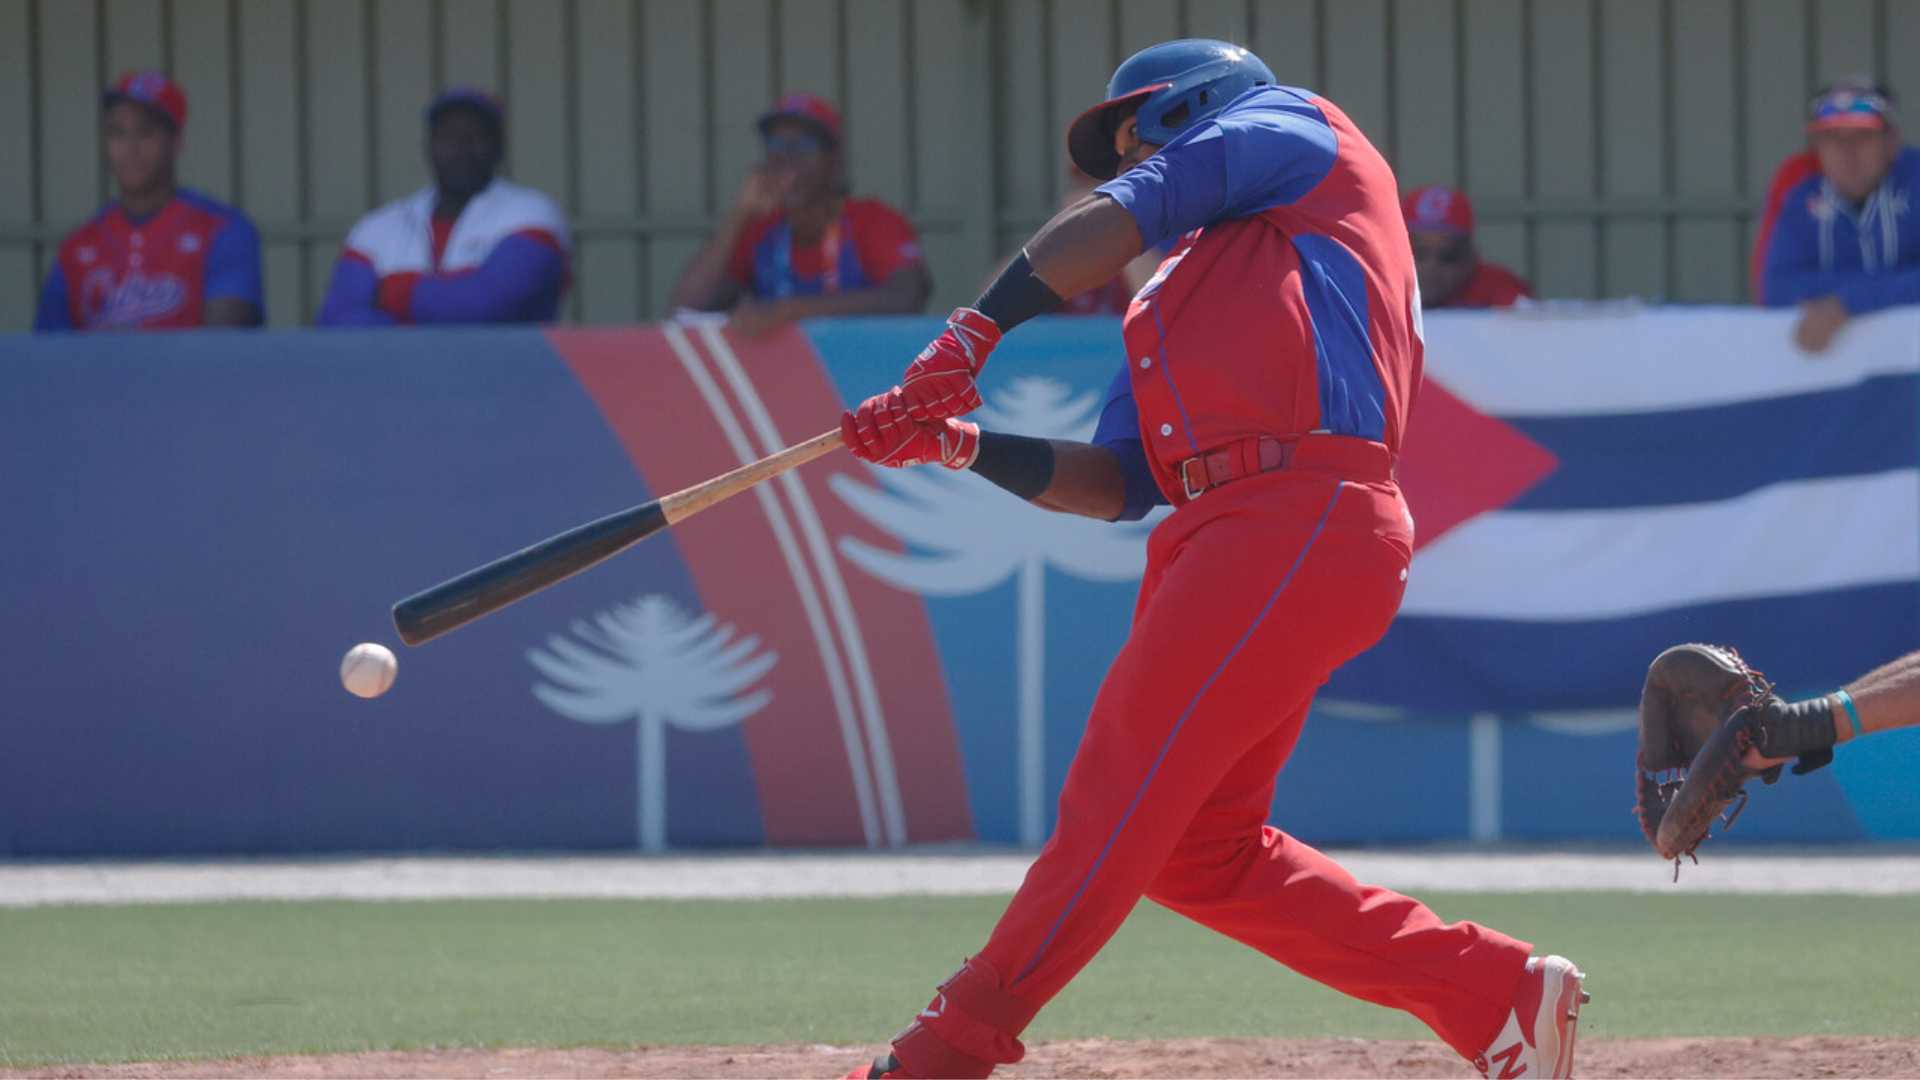 Baseball: The Dominican Republic Takes Fifth Place in the Pan American Games